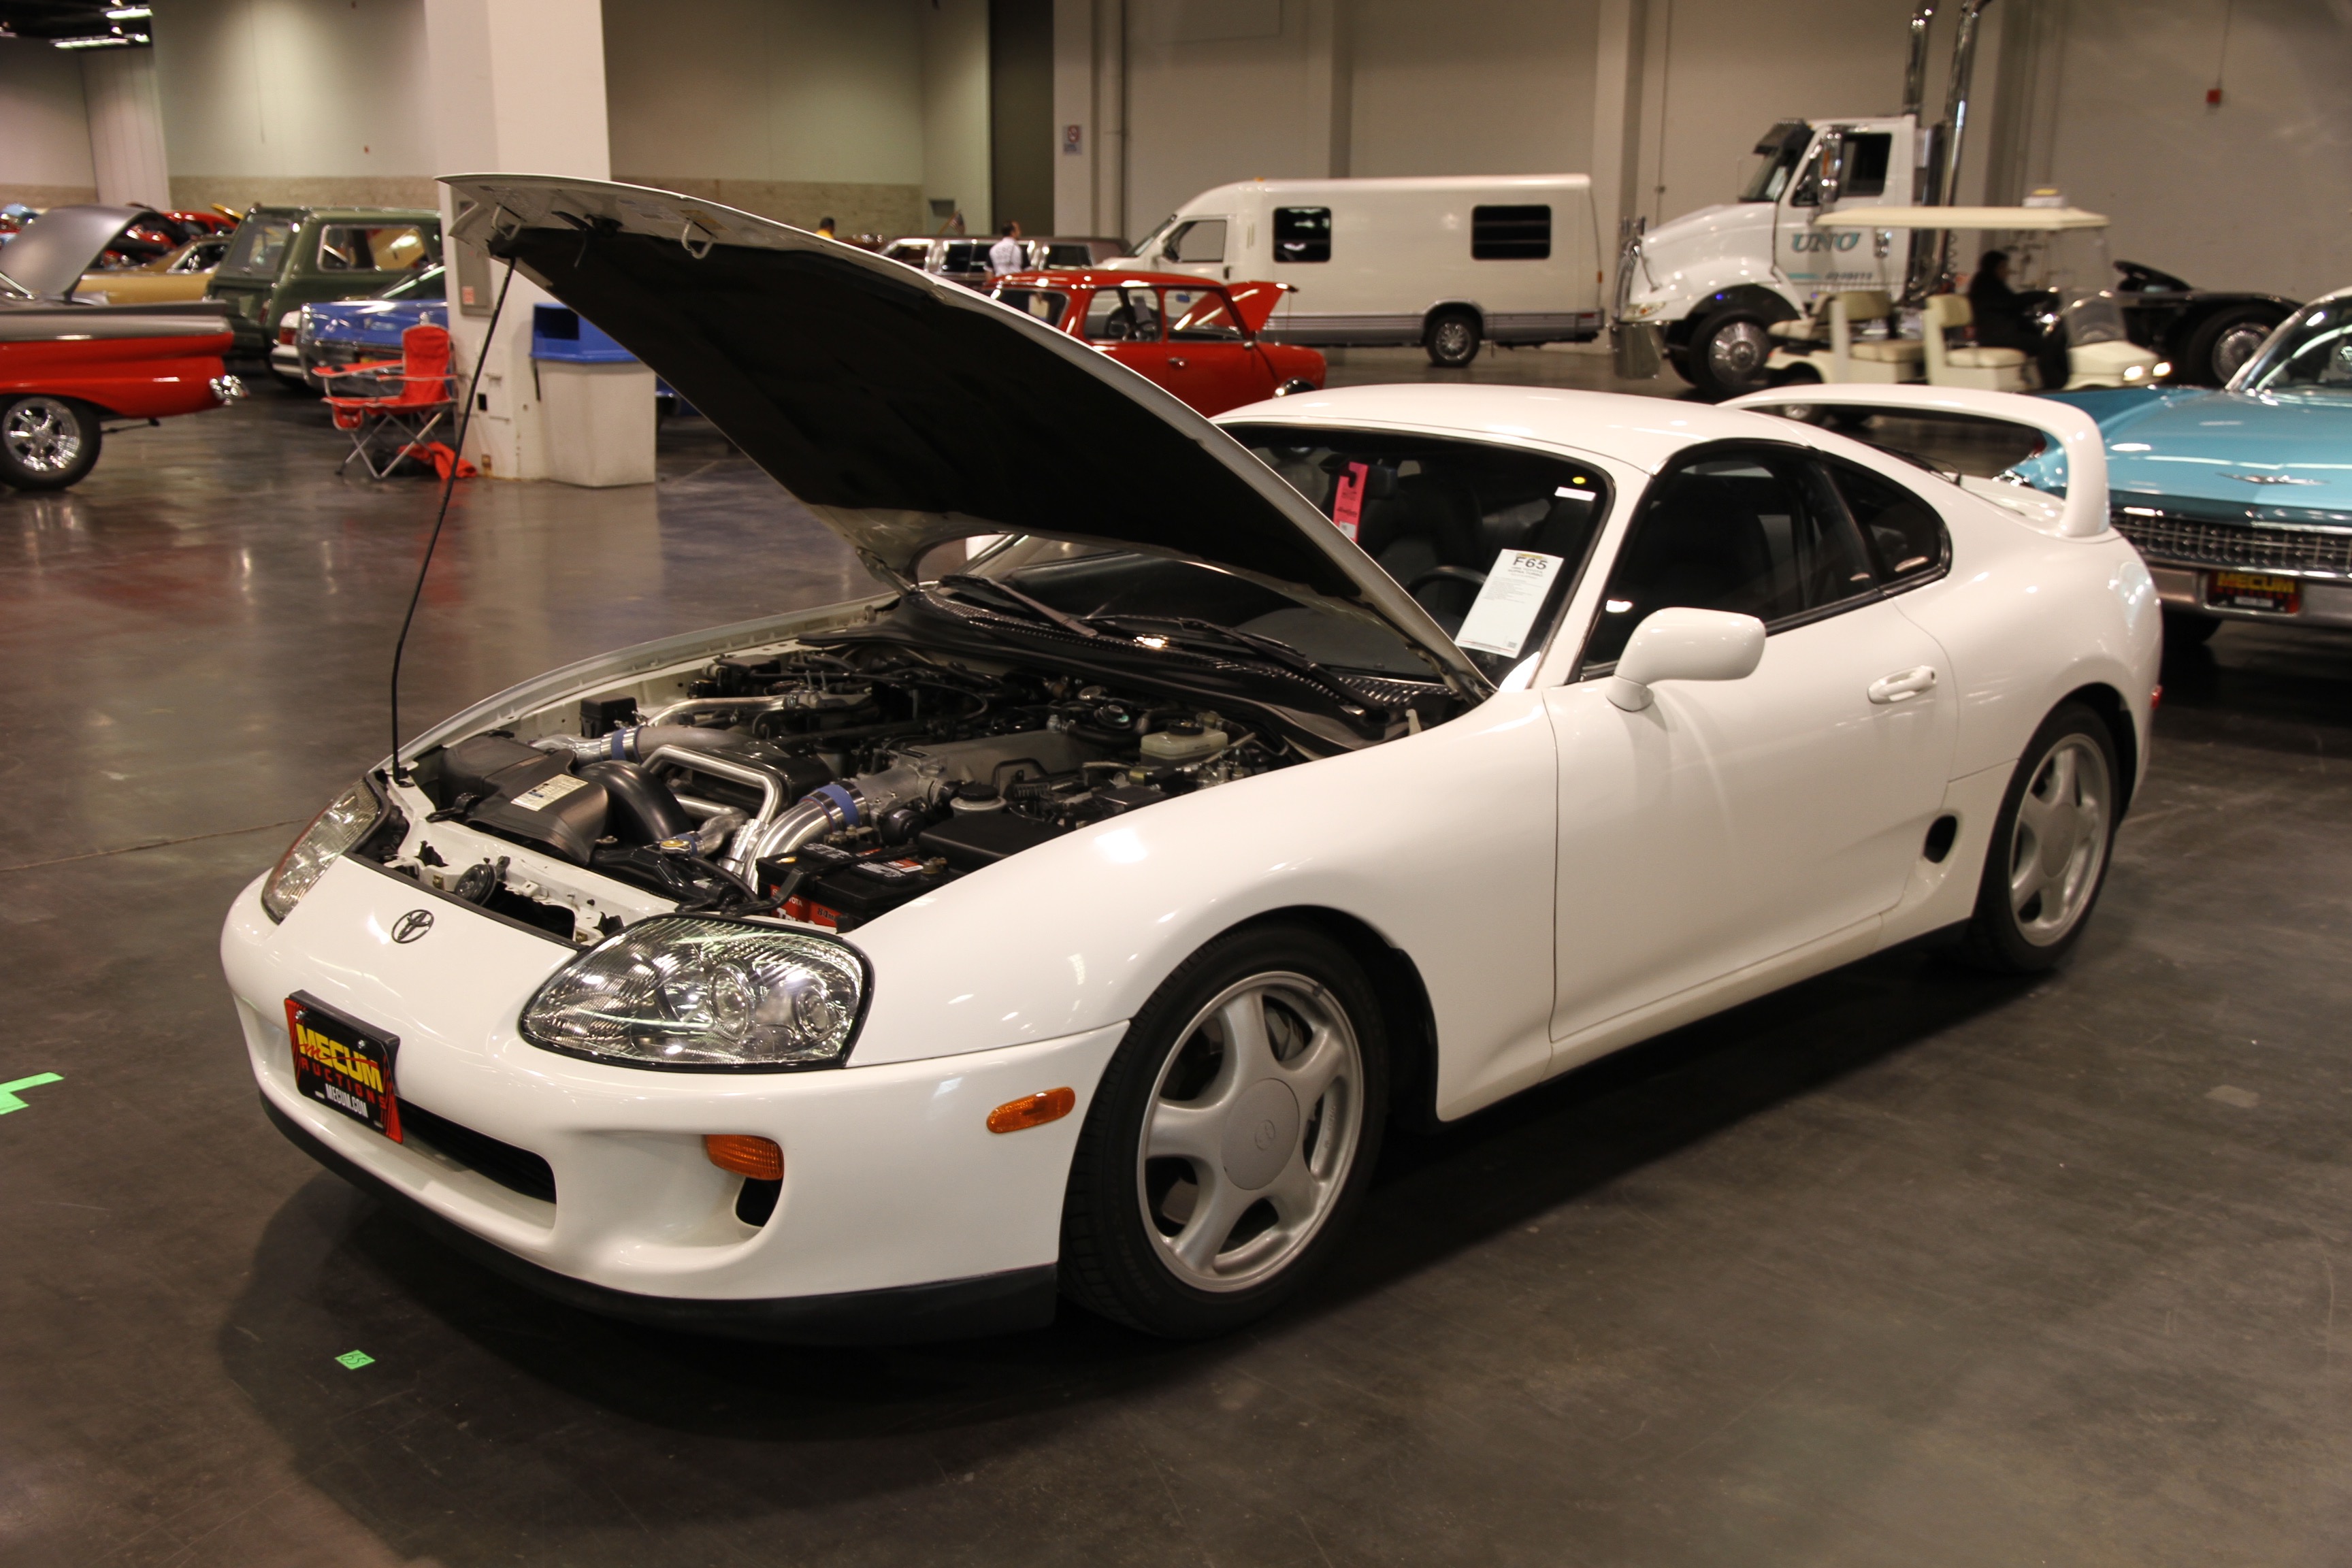 This 1997 Toyota Supra just sold for P4.38 million